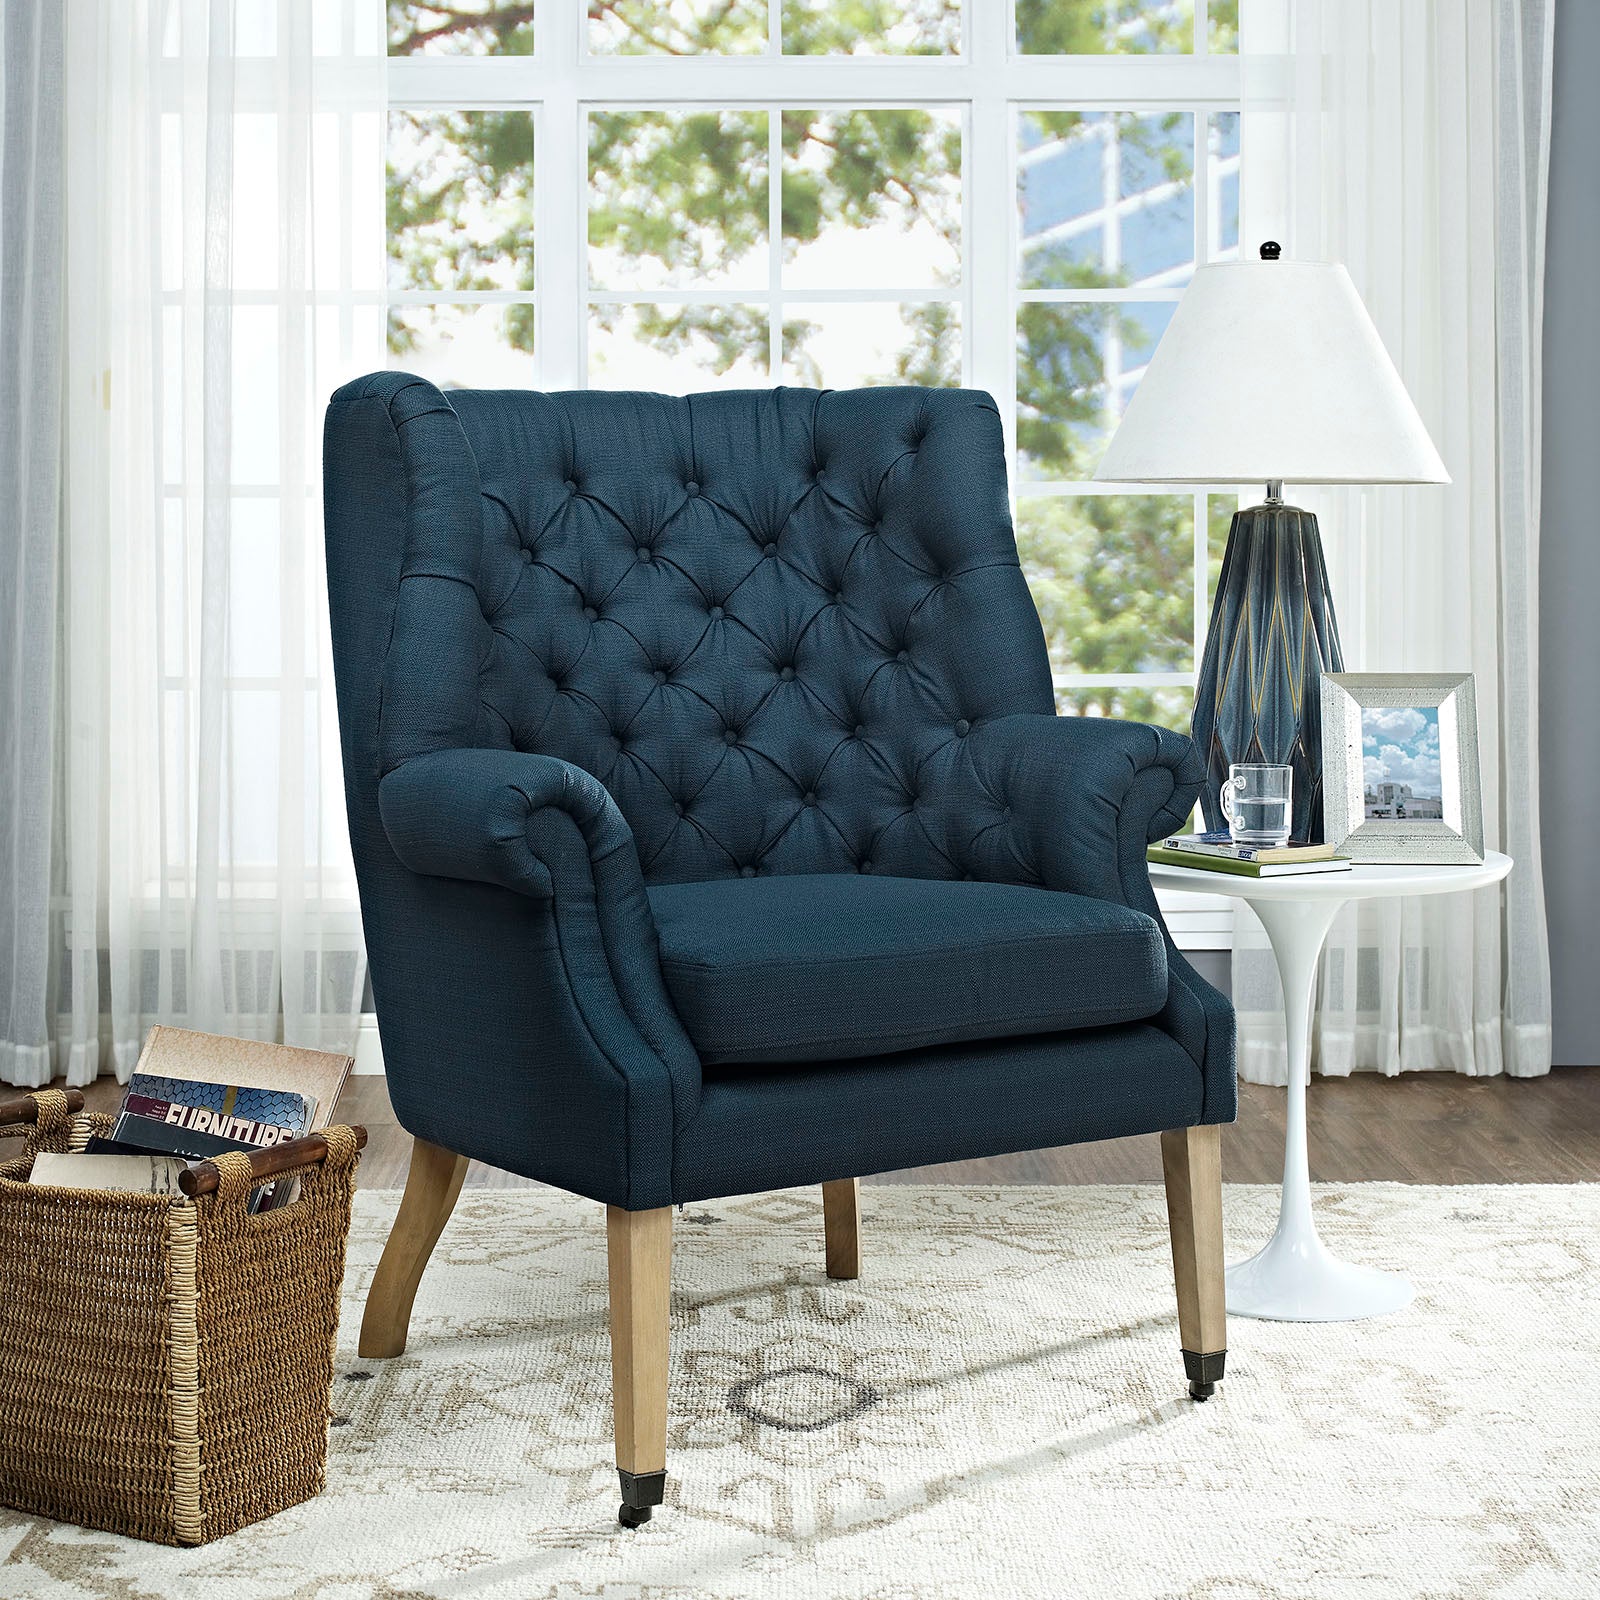 Modway Accent Chairs - Chart Upholstered Fabric Lounge Chair Azure